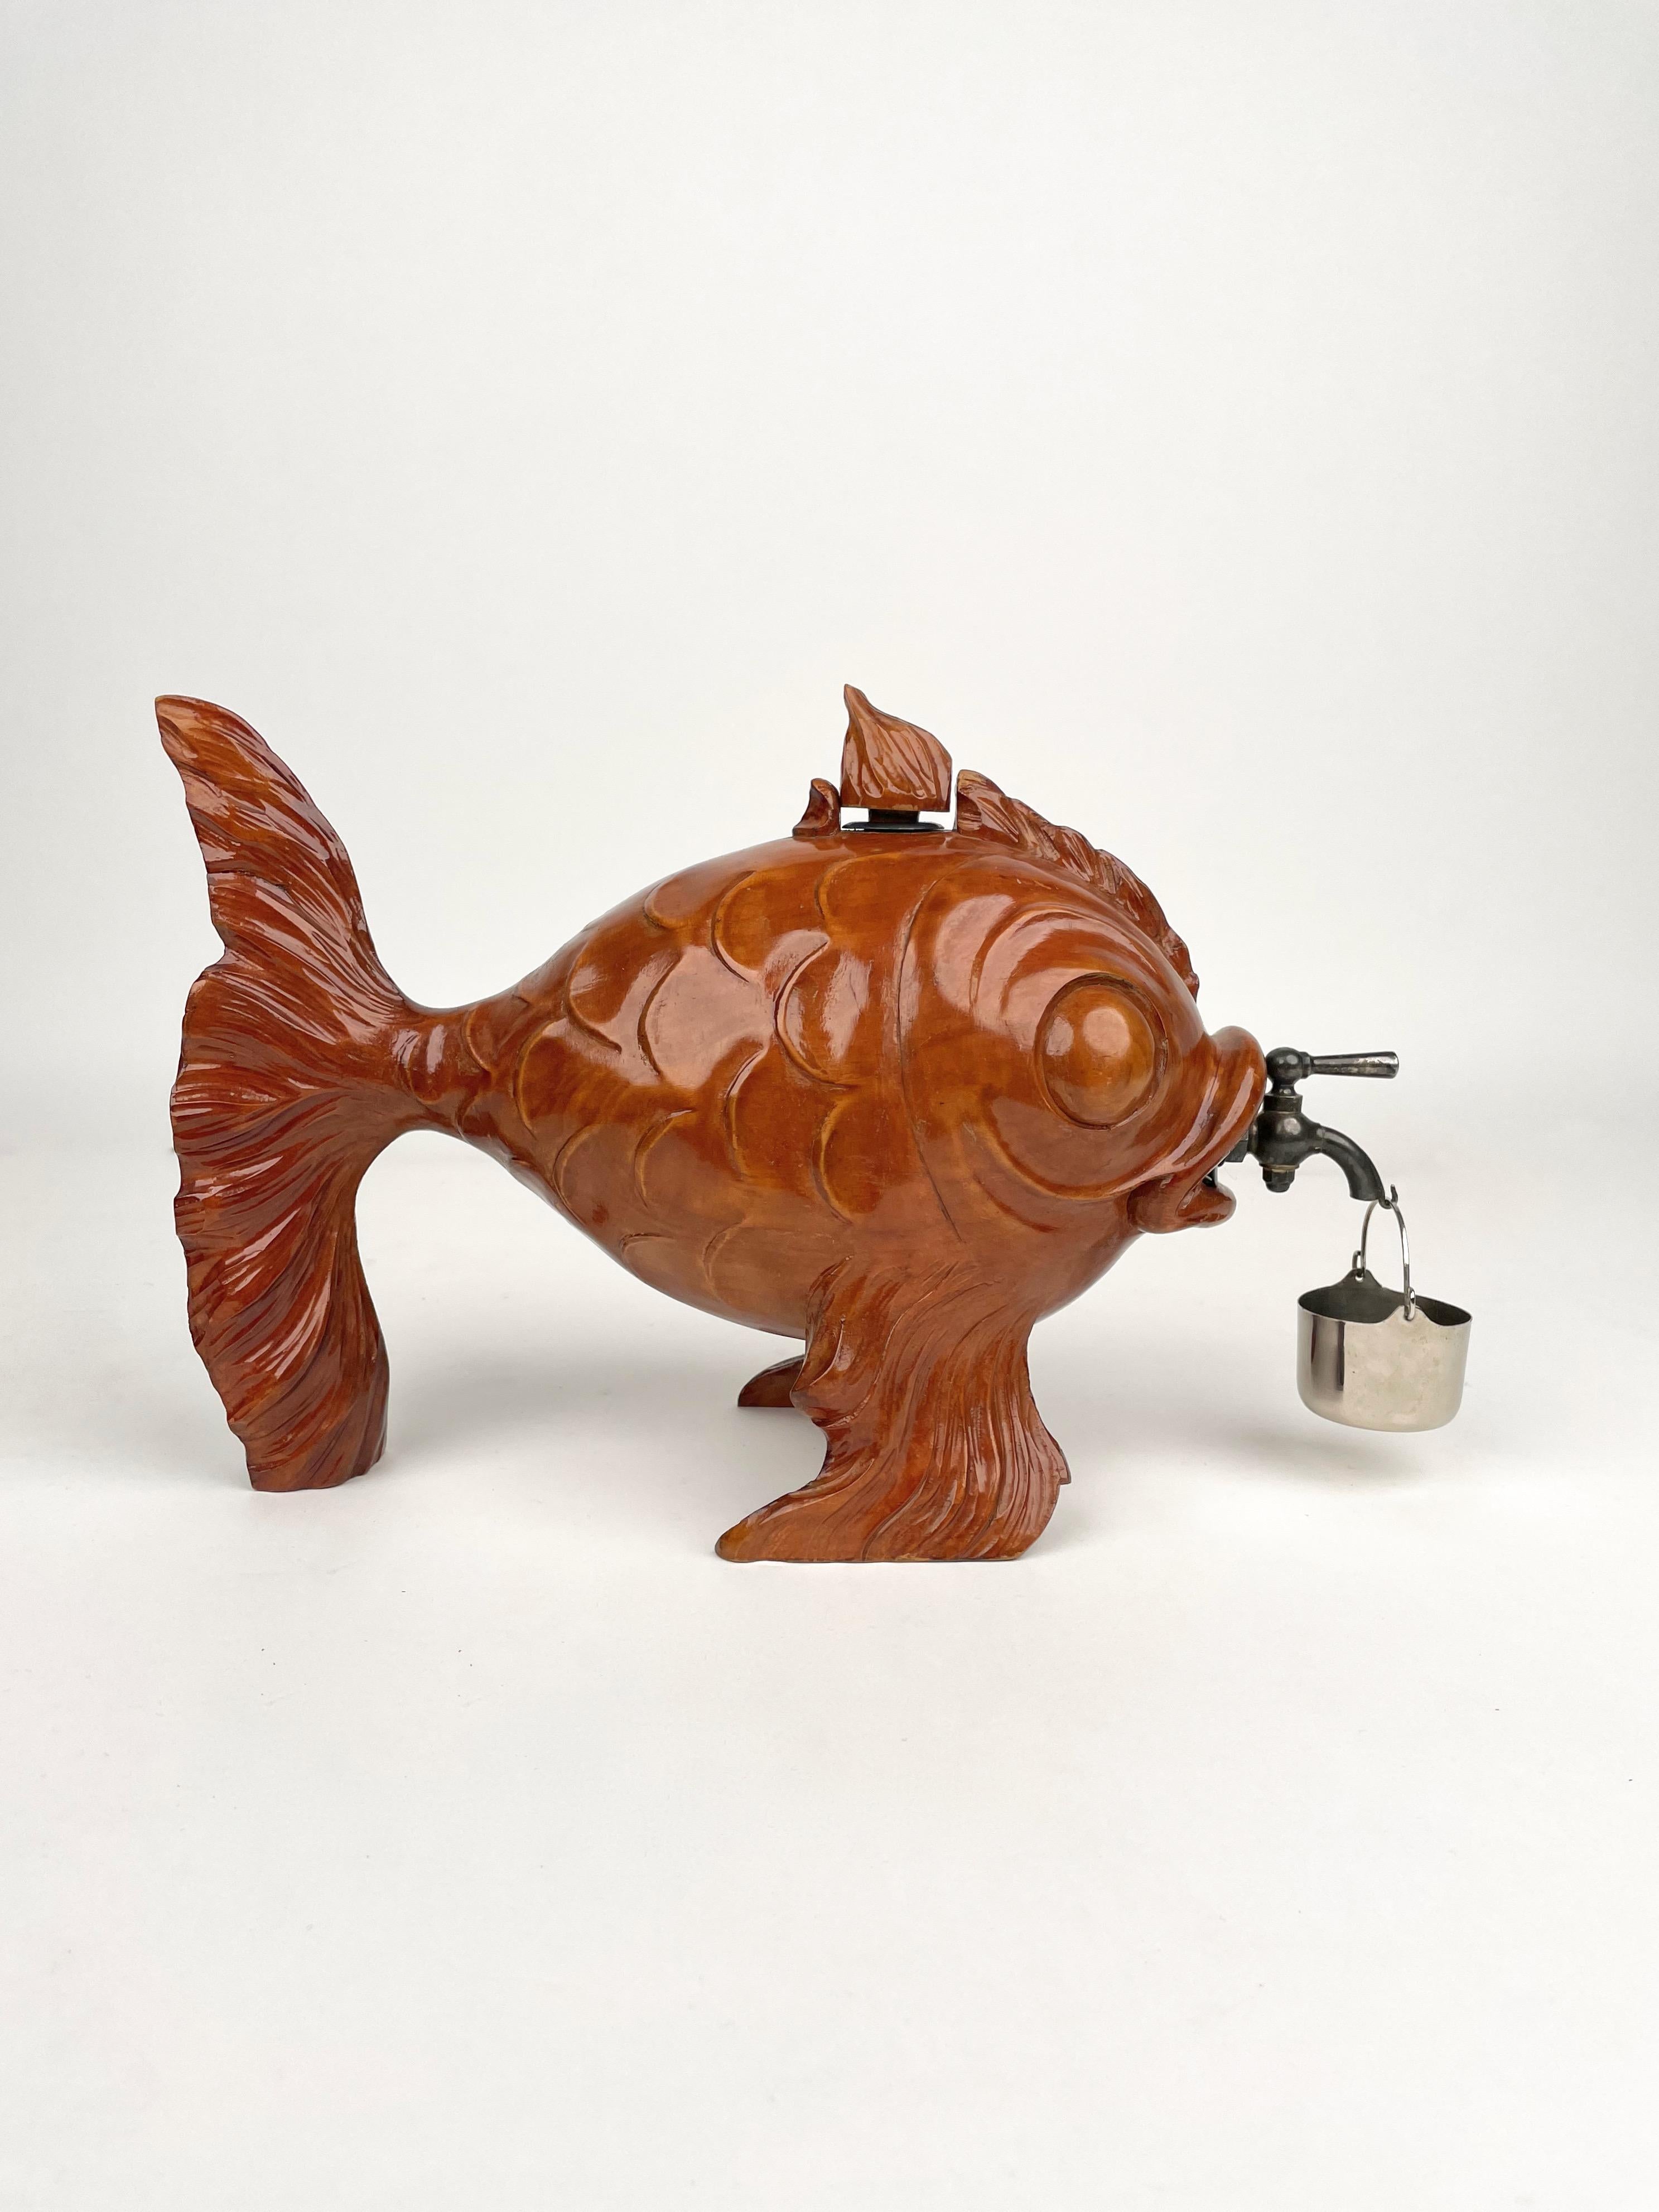 1950s fish shaped bottle dispenser in hand-carved wood featuring metal details by the Italian designer Aldo Tura for Macabo.